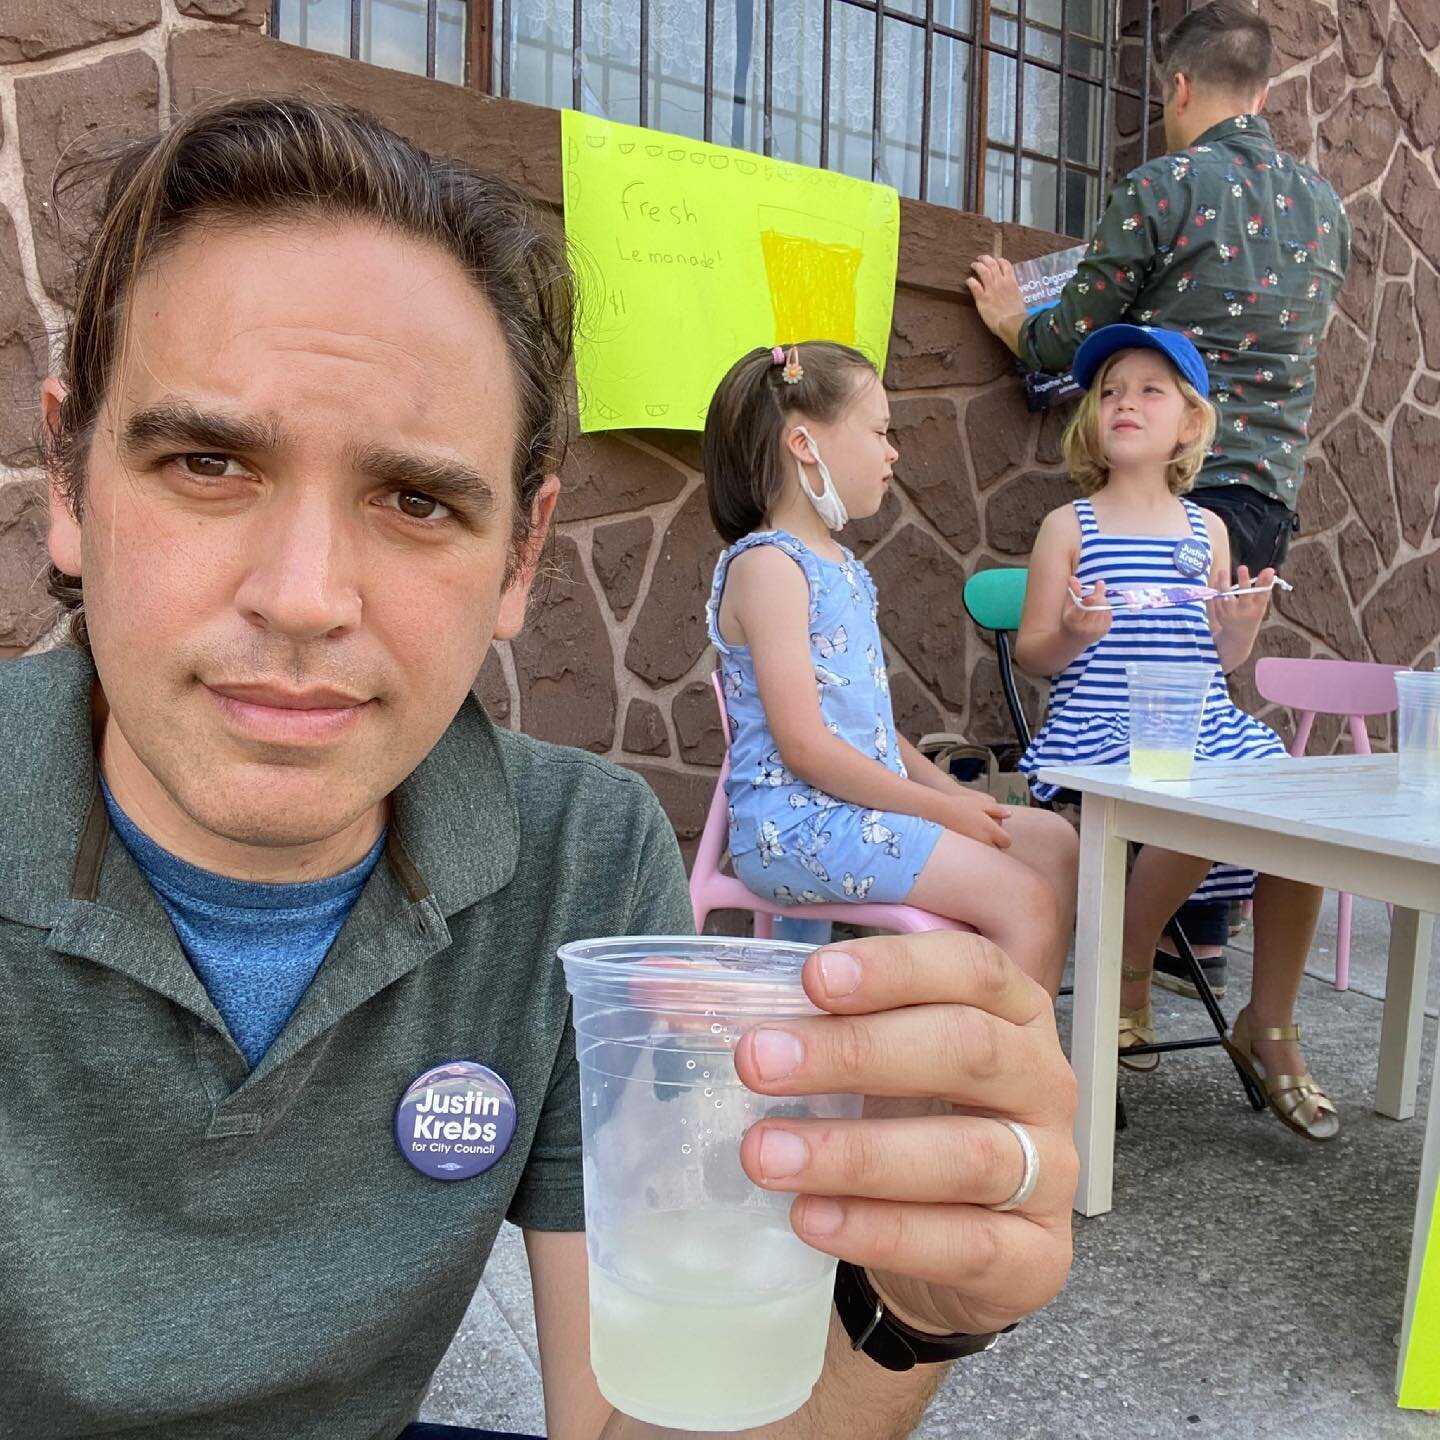 New trendy spot in Brooklyn, it&rsquo;s called &ldquo;Lemonade Stand,&rdquo; really incredible drinks.

Stopped for a sip as a break from some canvassing today, turns out they&rsquo;re supporters of mine! Couldn&rsquo;t be happier! 😄

#Together39 #K